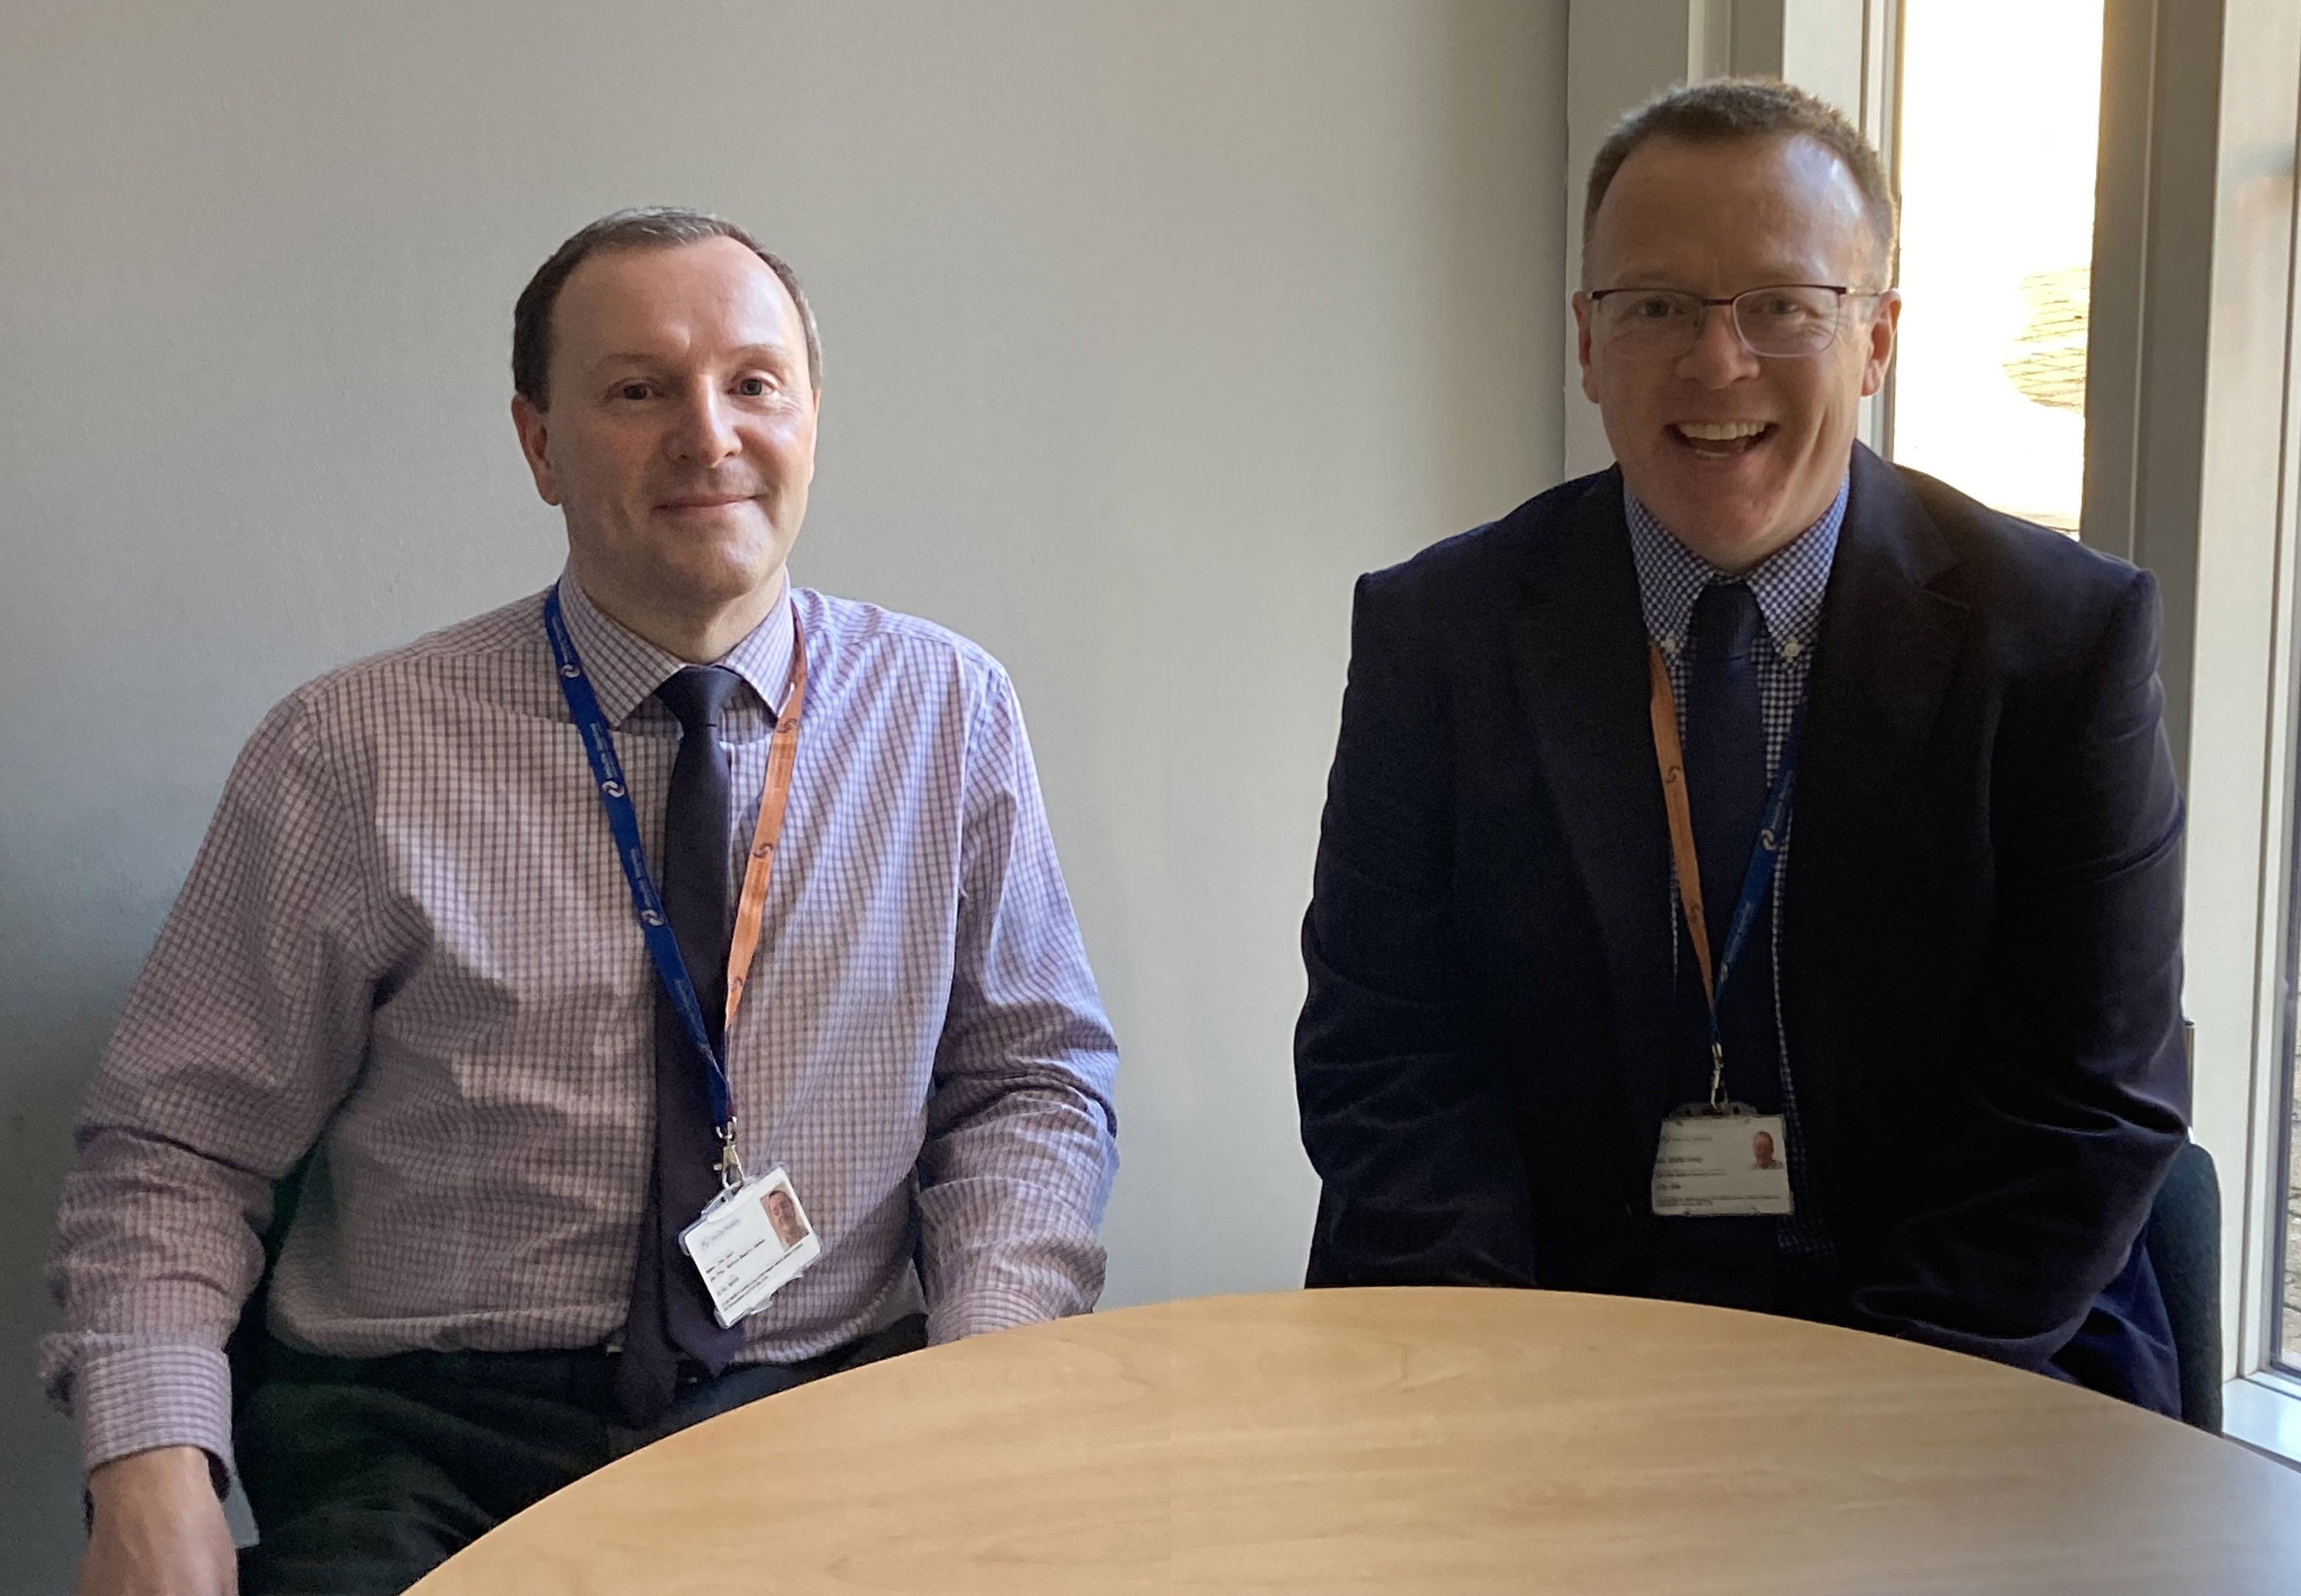 Melville achieves Scottish National Standard for Information and Advice Providers